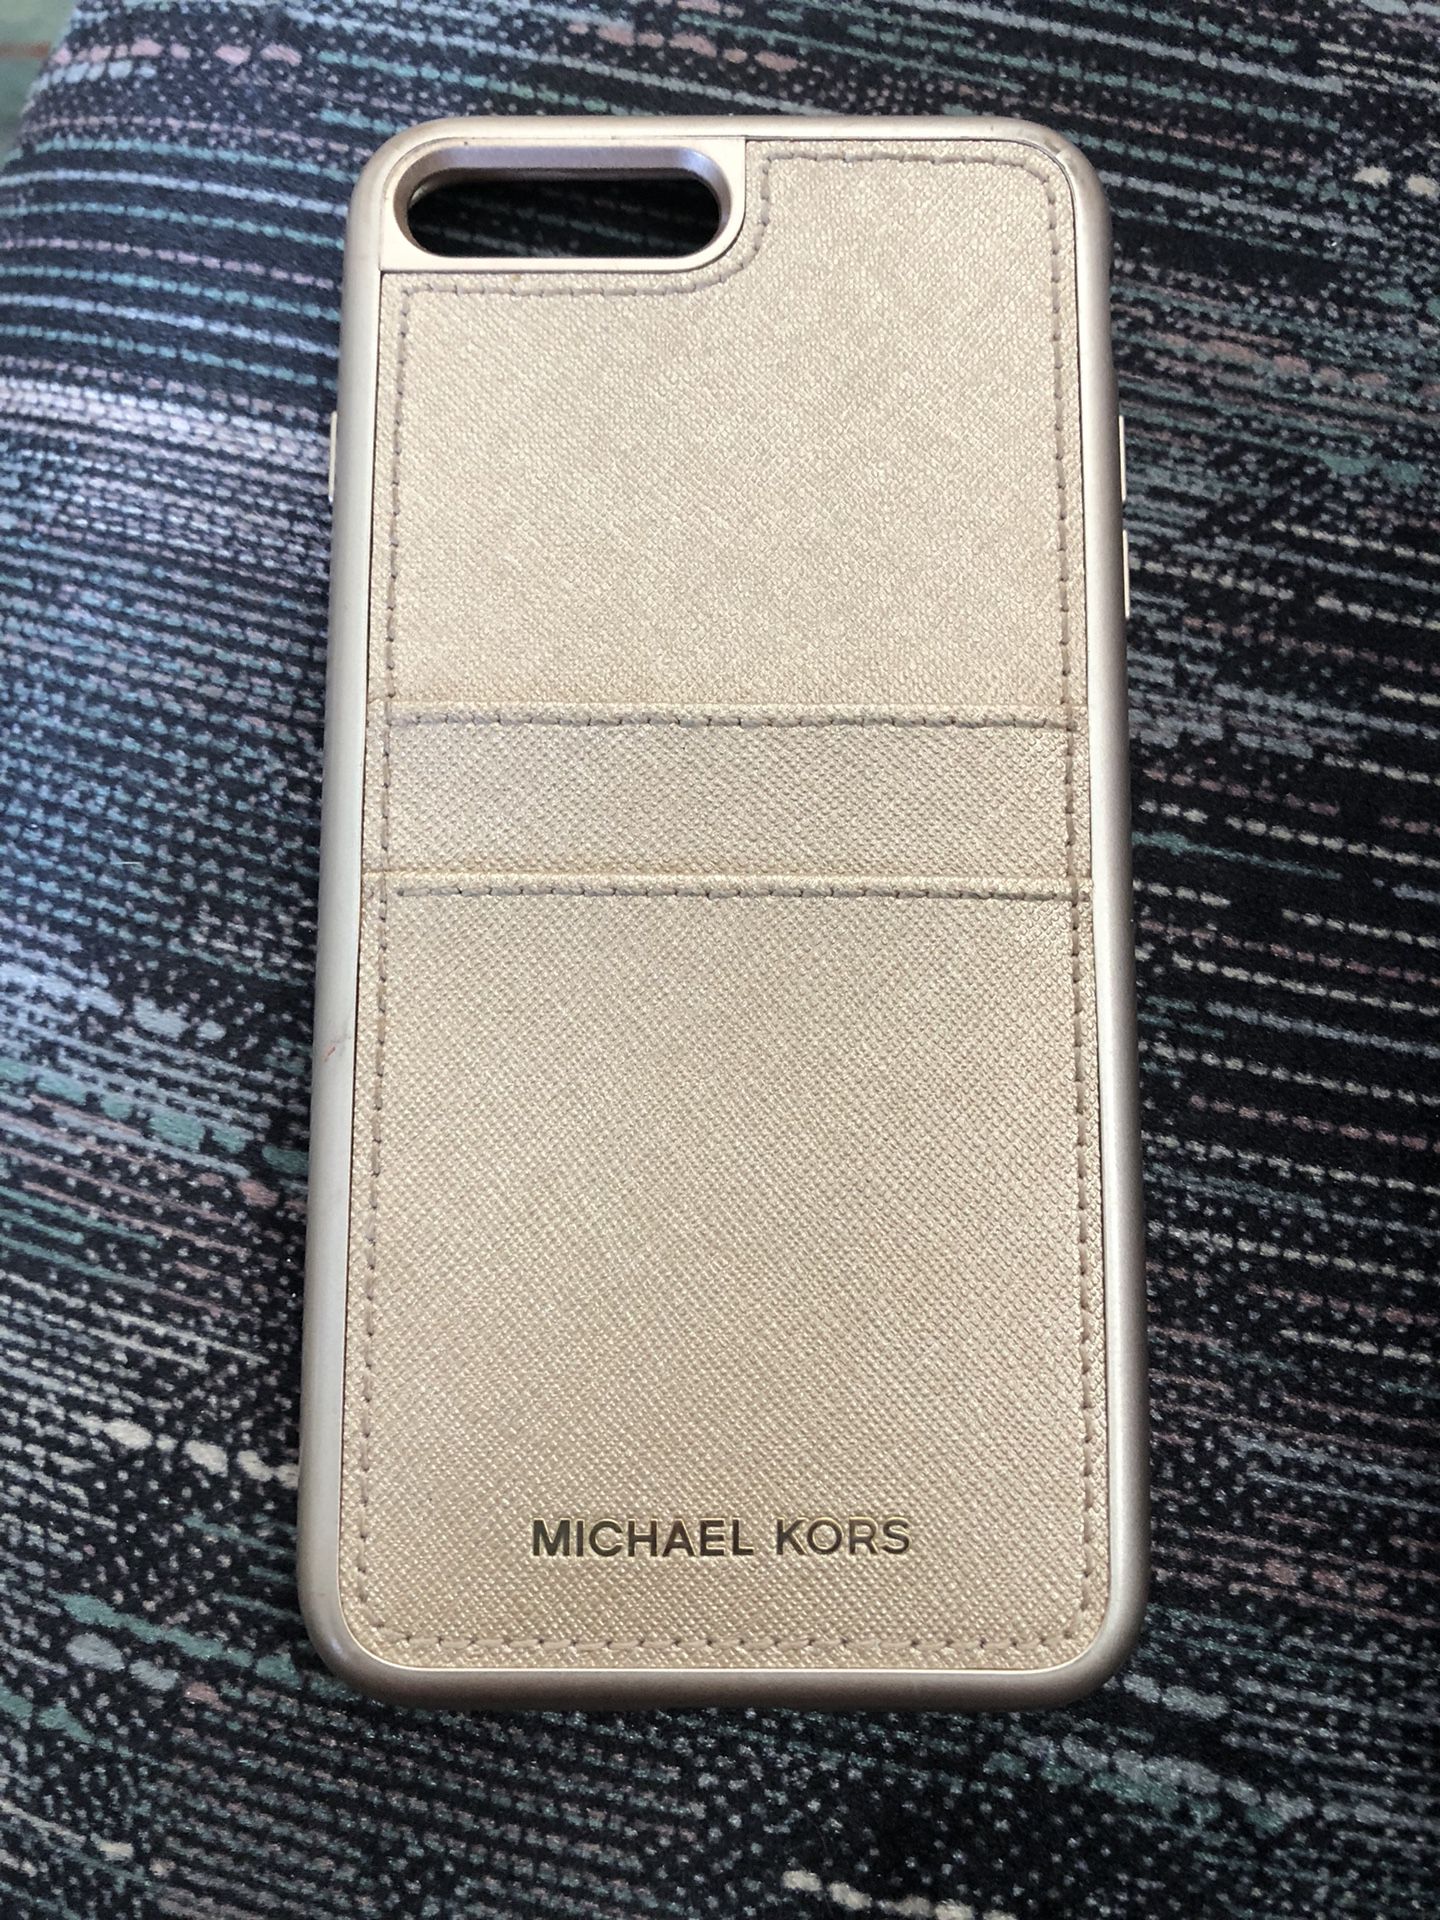 vod diamant Psychologisch Rose Gold iPhone 7 Plus/8plus Michael Kors phone case for Sale in  Middletown, OH - OfferUp